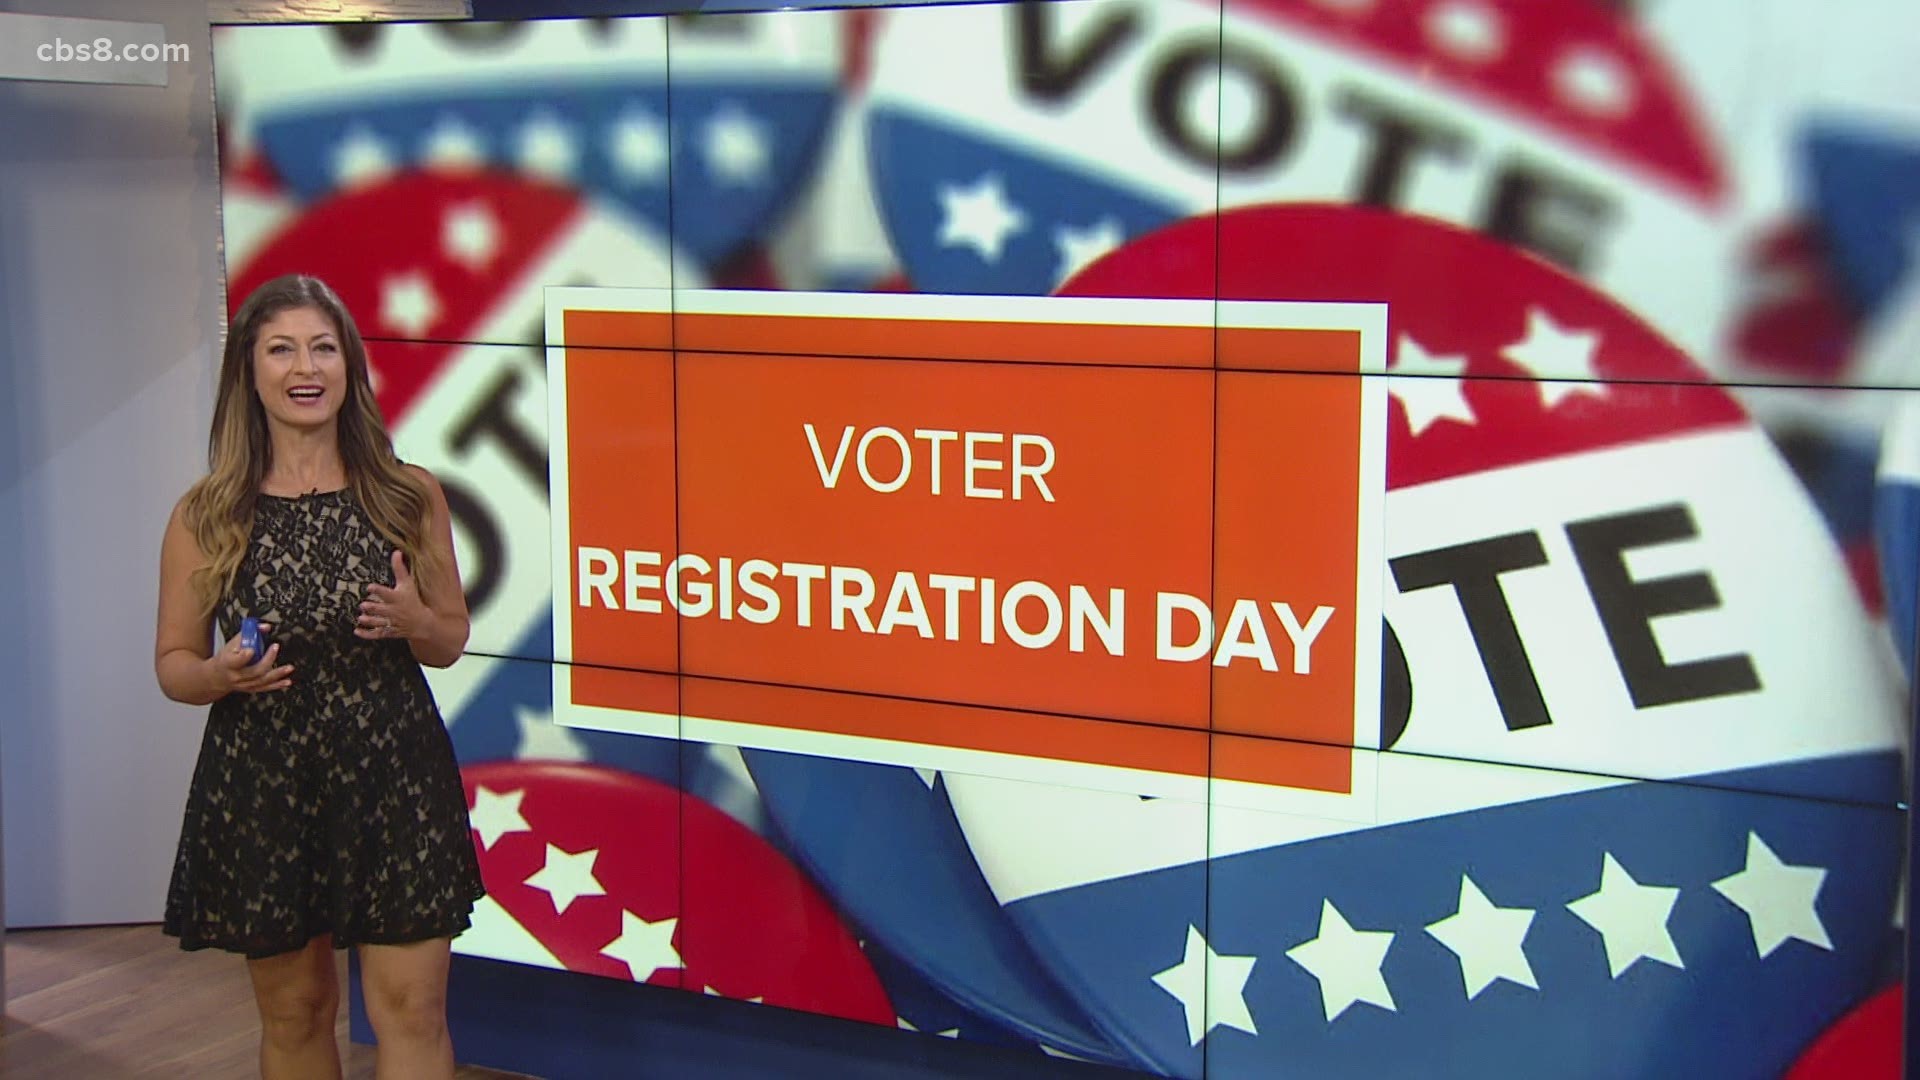 News 8's Neda Iranpour breaks down what you need to do to register to vote. She then explains what a provisional ballot is.